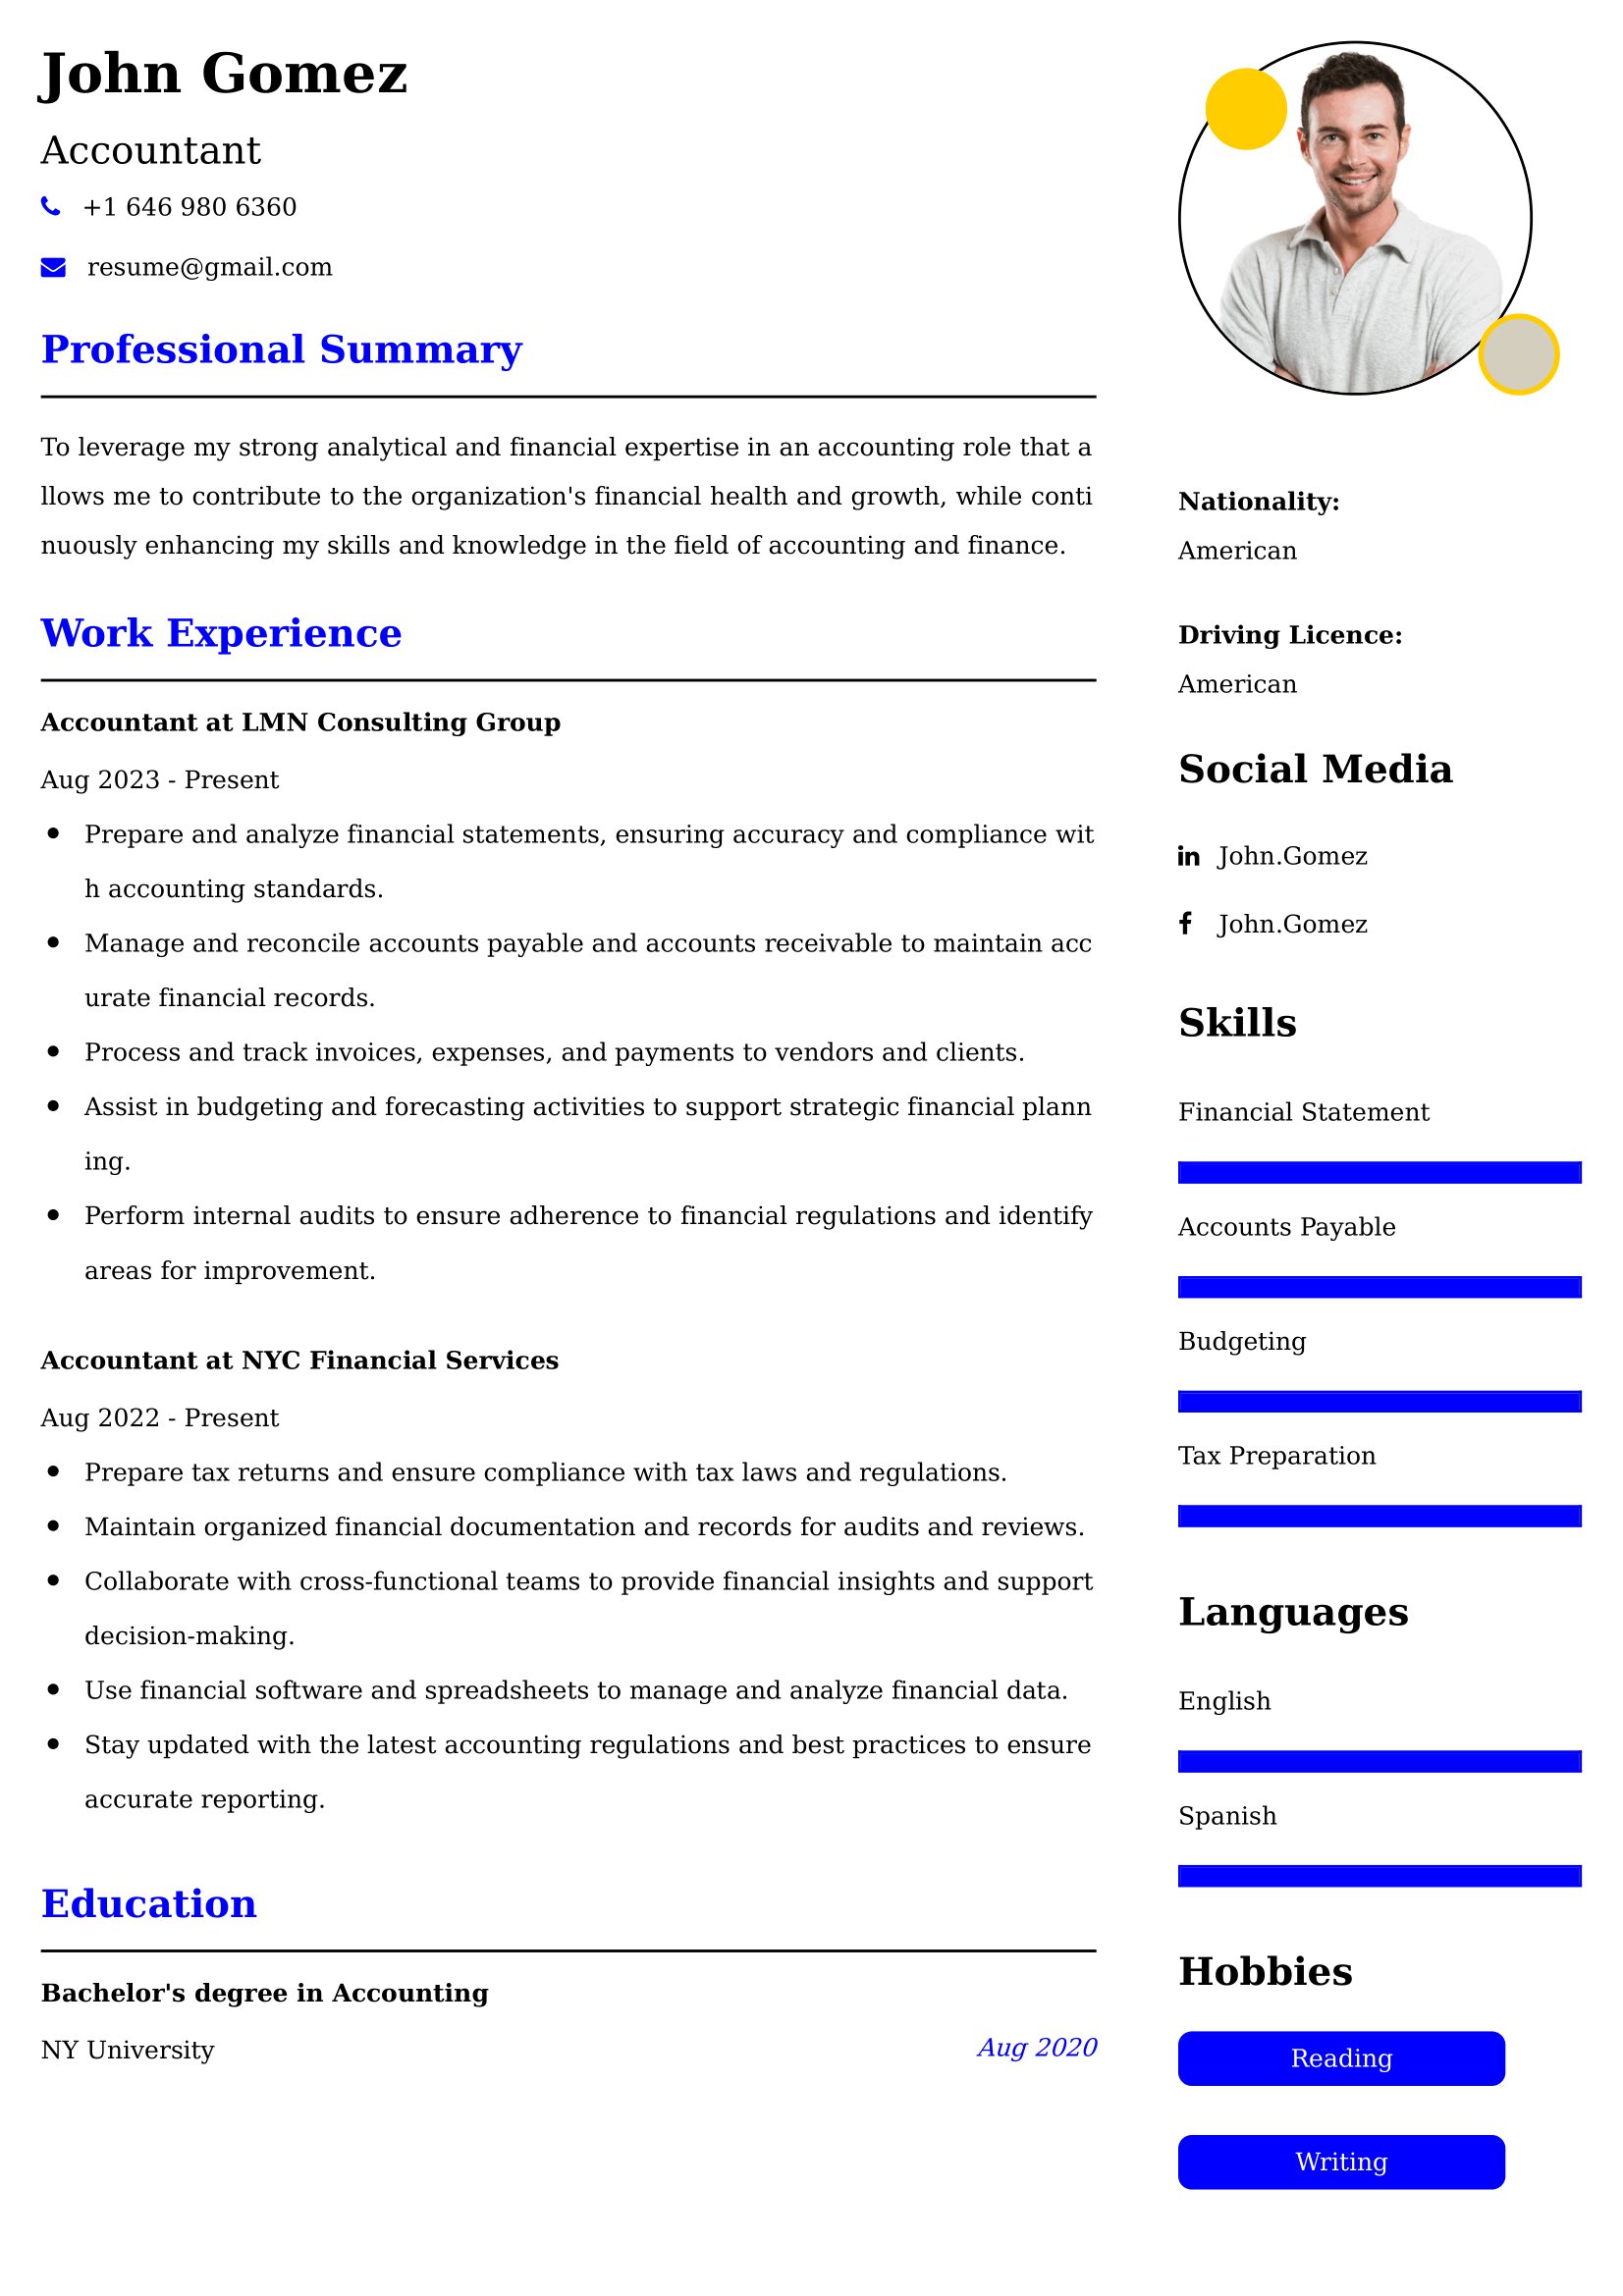 Accountant Resume Examples - Canadian Format and Tips